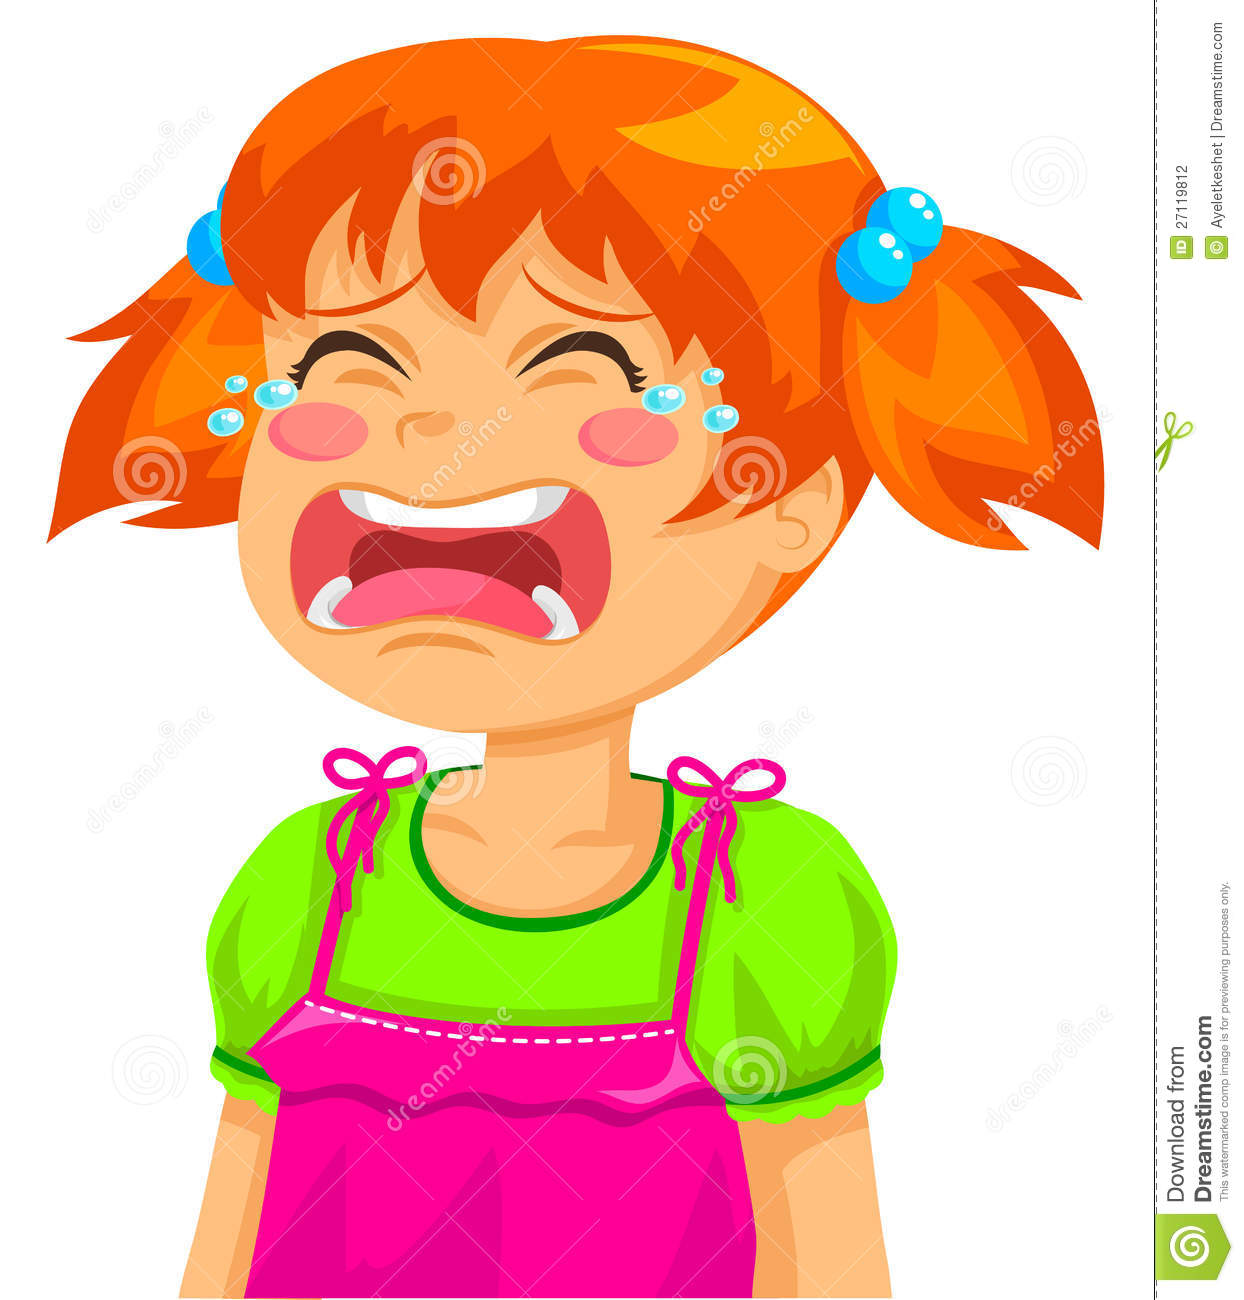 5572 Crying free clipart.